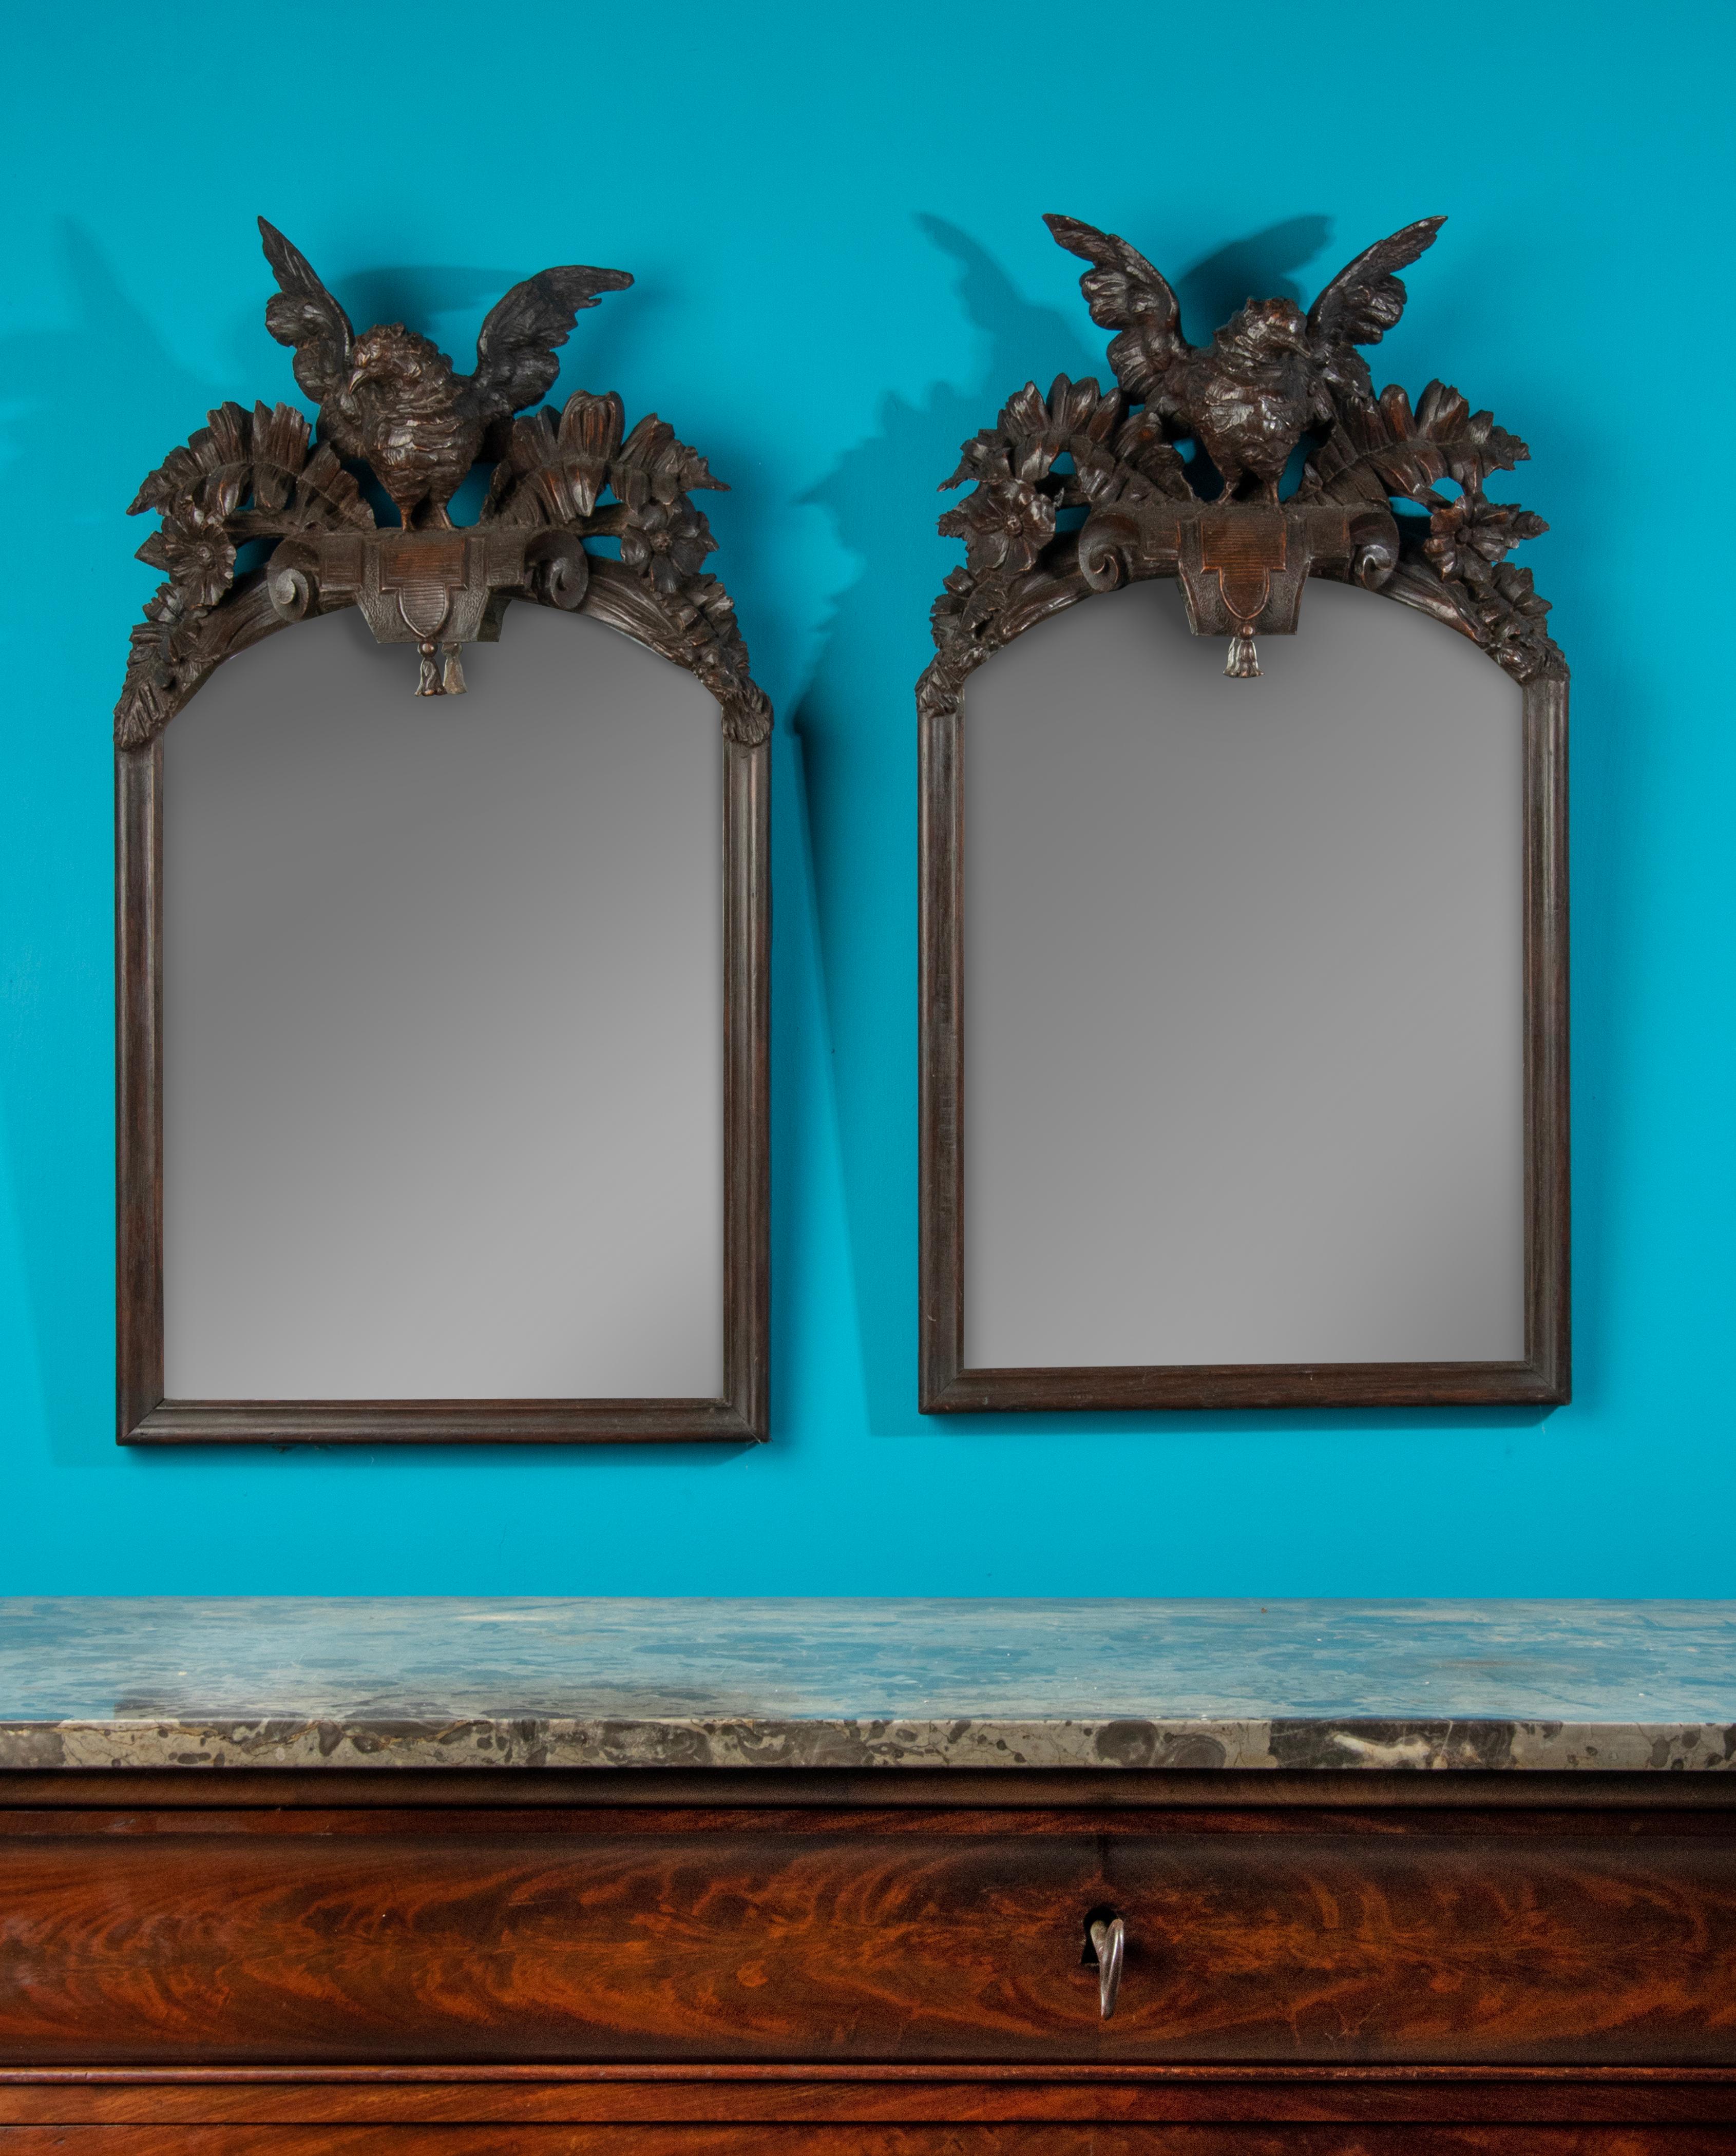 A pair of elegant French mirrors, carved from solid oakwood in Black Forest style. Bird is depicted on both mirrors, each in an asymmetrical manner, so that it is an original couple. The birds are flanked by flowers and leaves ornaments. These